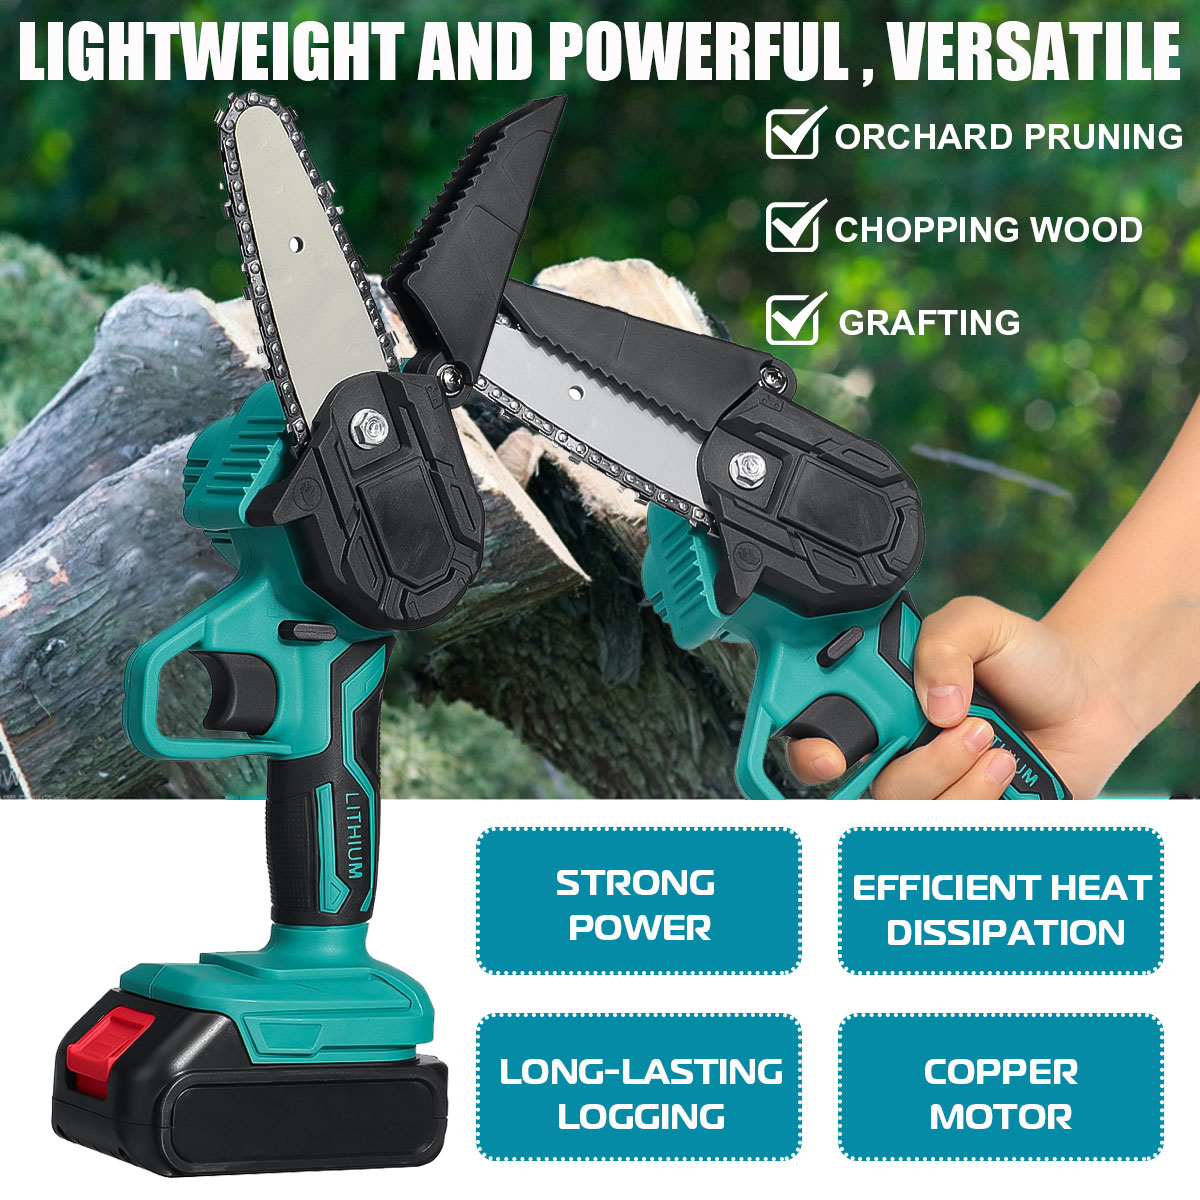 4-Inch-26V-Cordless-Electric-Chain-Saw-600W-One-Hand-Saw-Woodworking-Tool-W-None12-Battery-Wood-Cutt-1867835-4